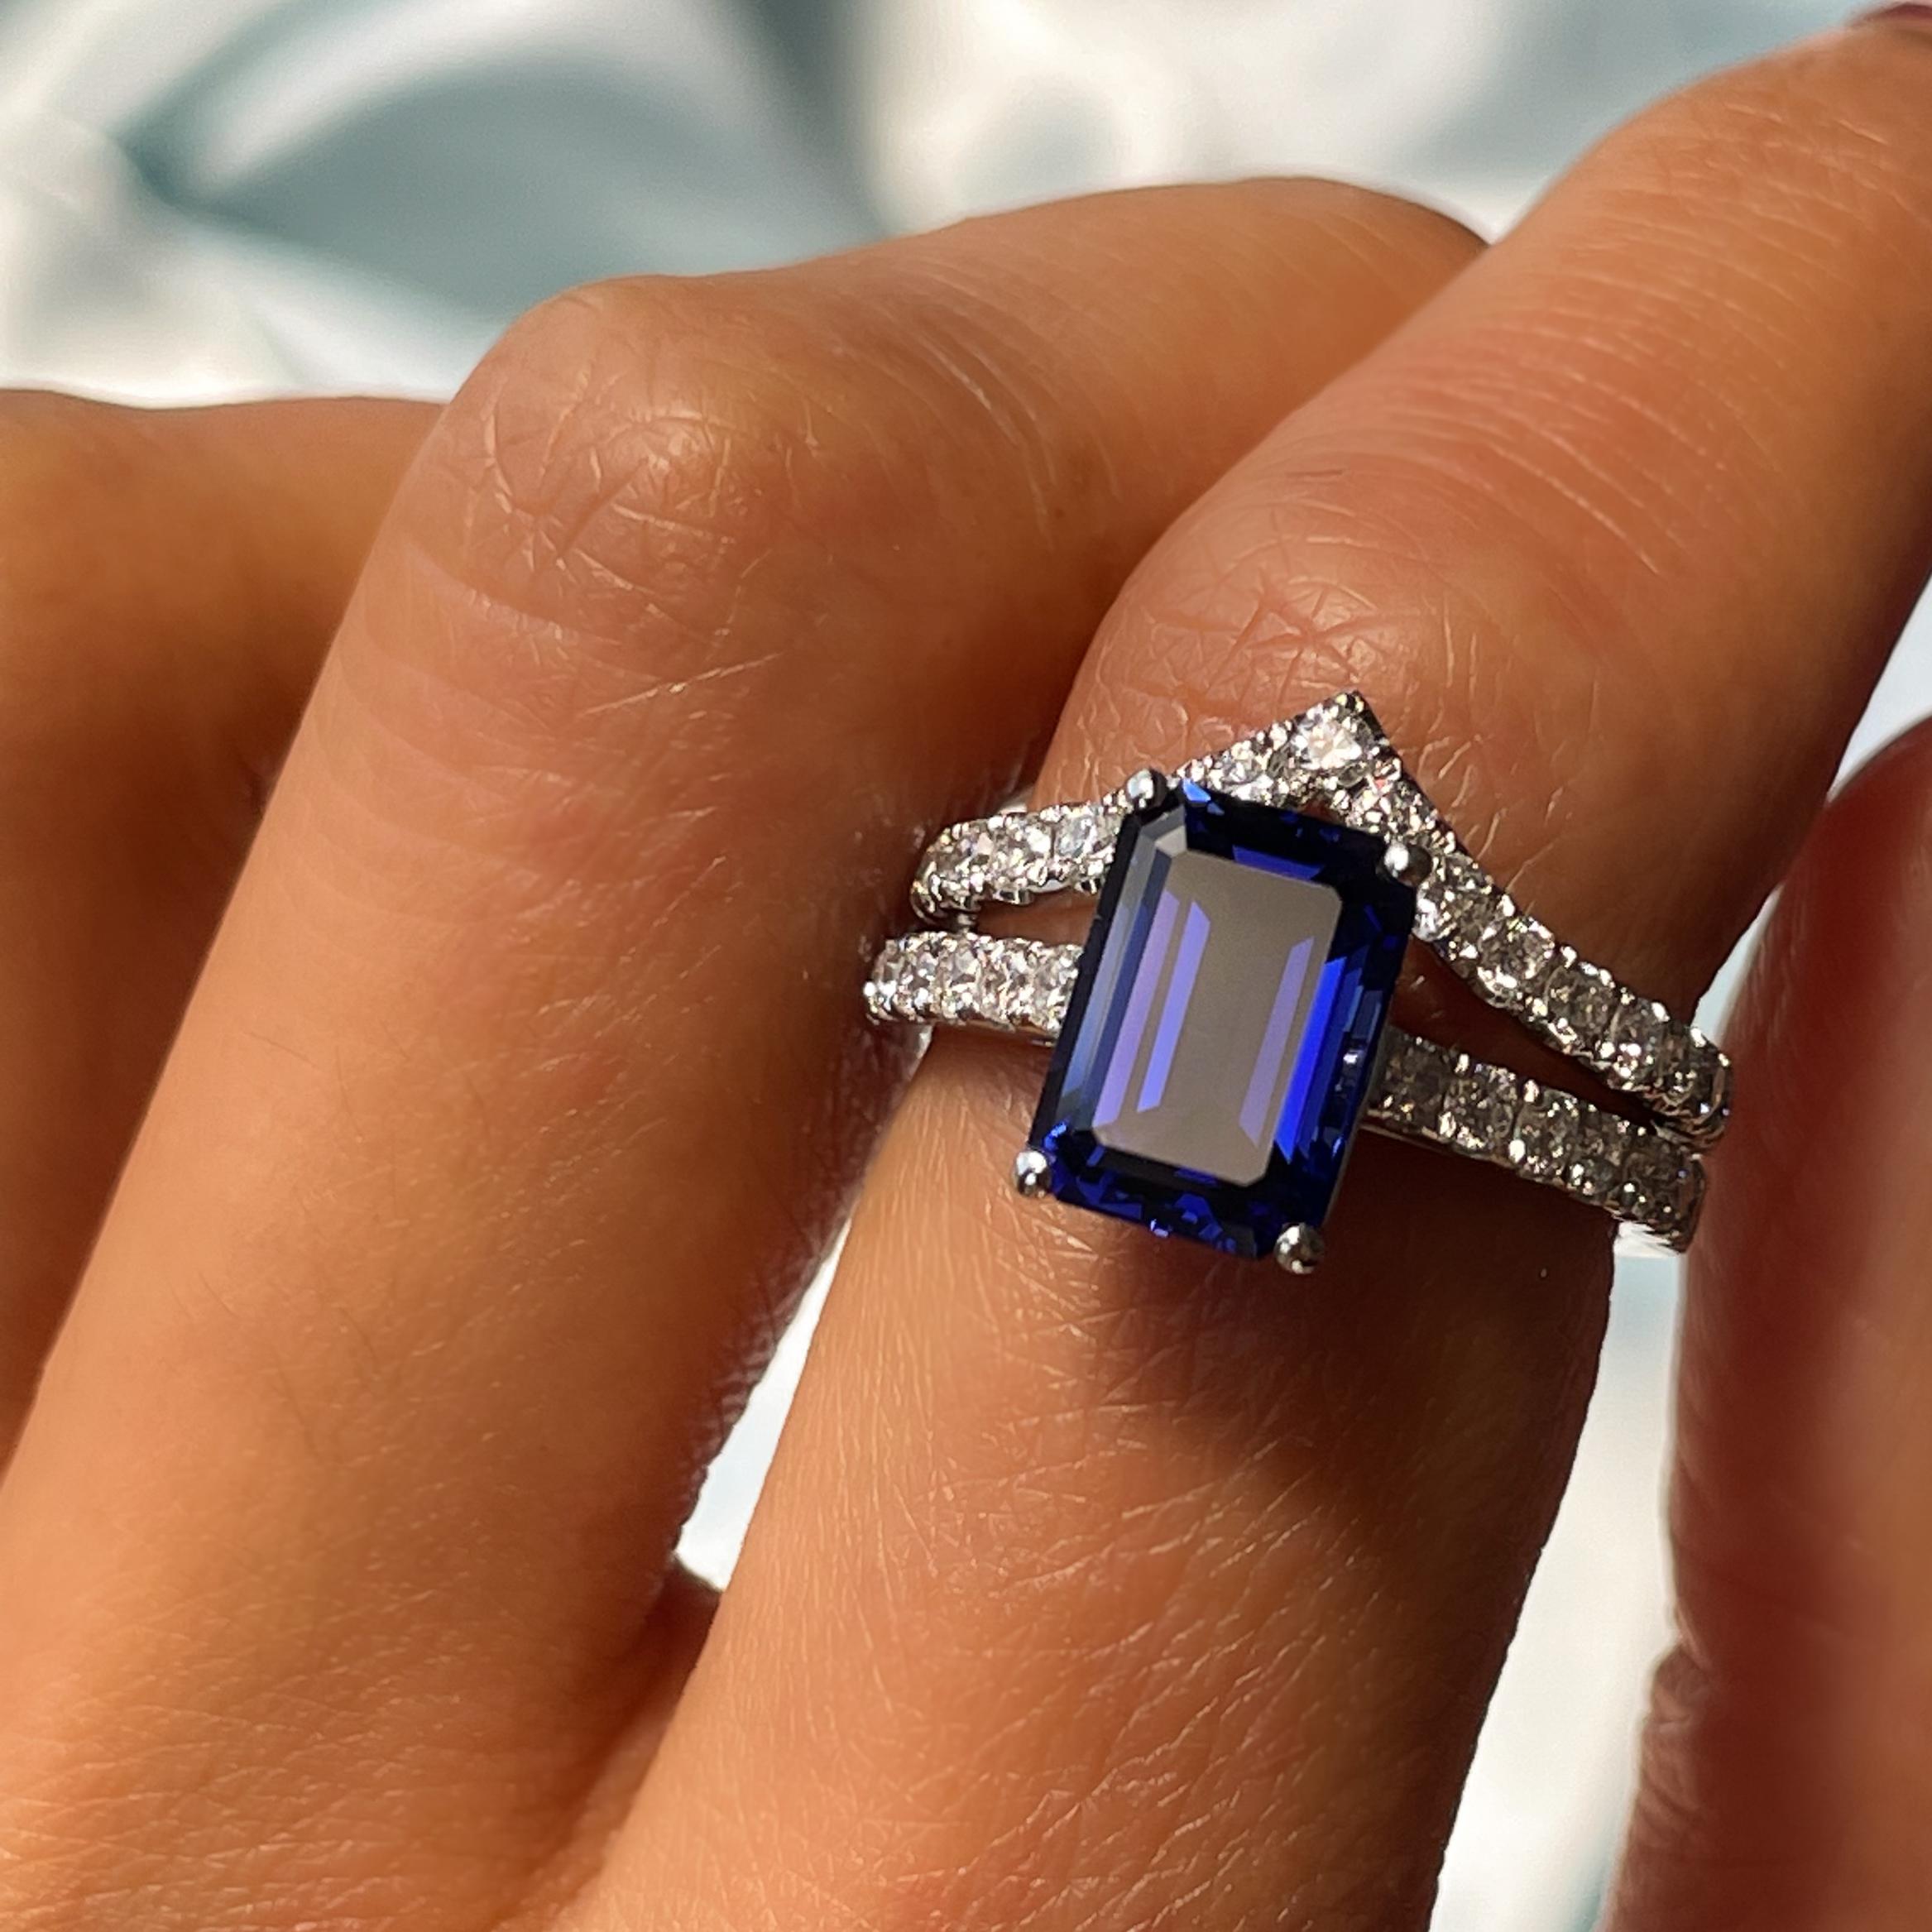 Bridal set featuring an emerald cut sapphire engagement ring in a platinum band and curved wedding ring both with pave diamonds 